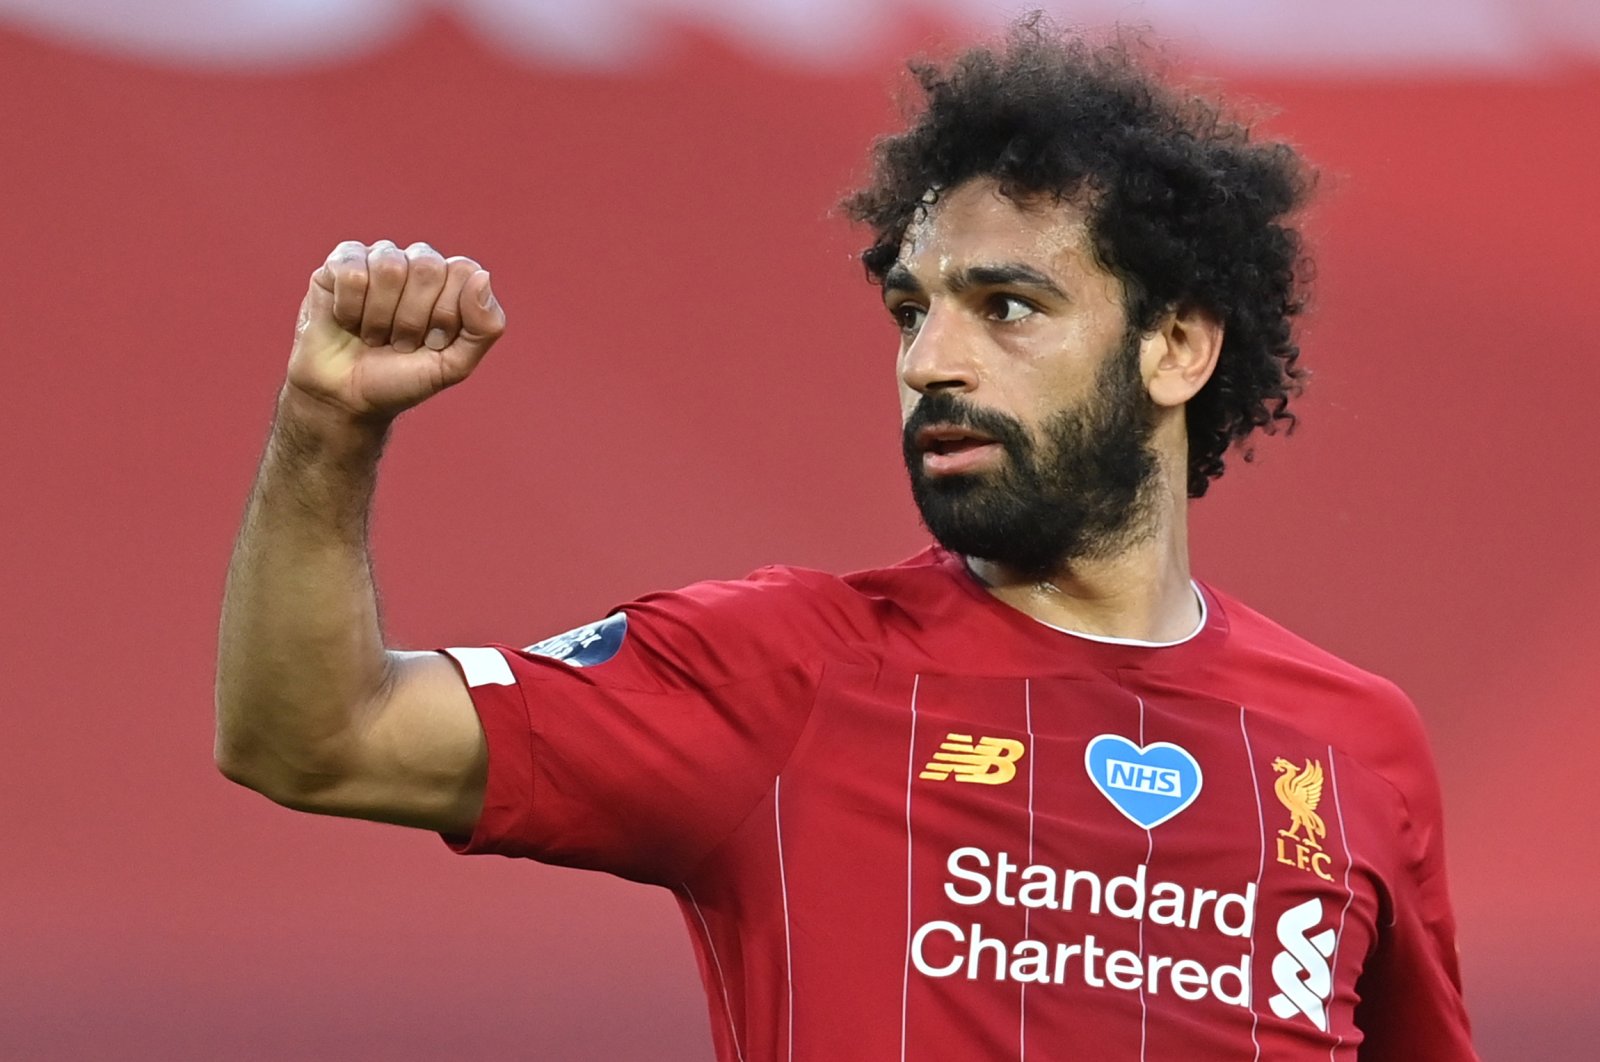 Liverpool's Mohamed Salah celebrates scoring their second goal as play resumes behind closed doors following the outbreak of COVID-19. (Reuters Photo)